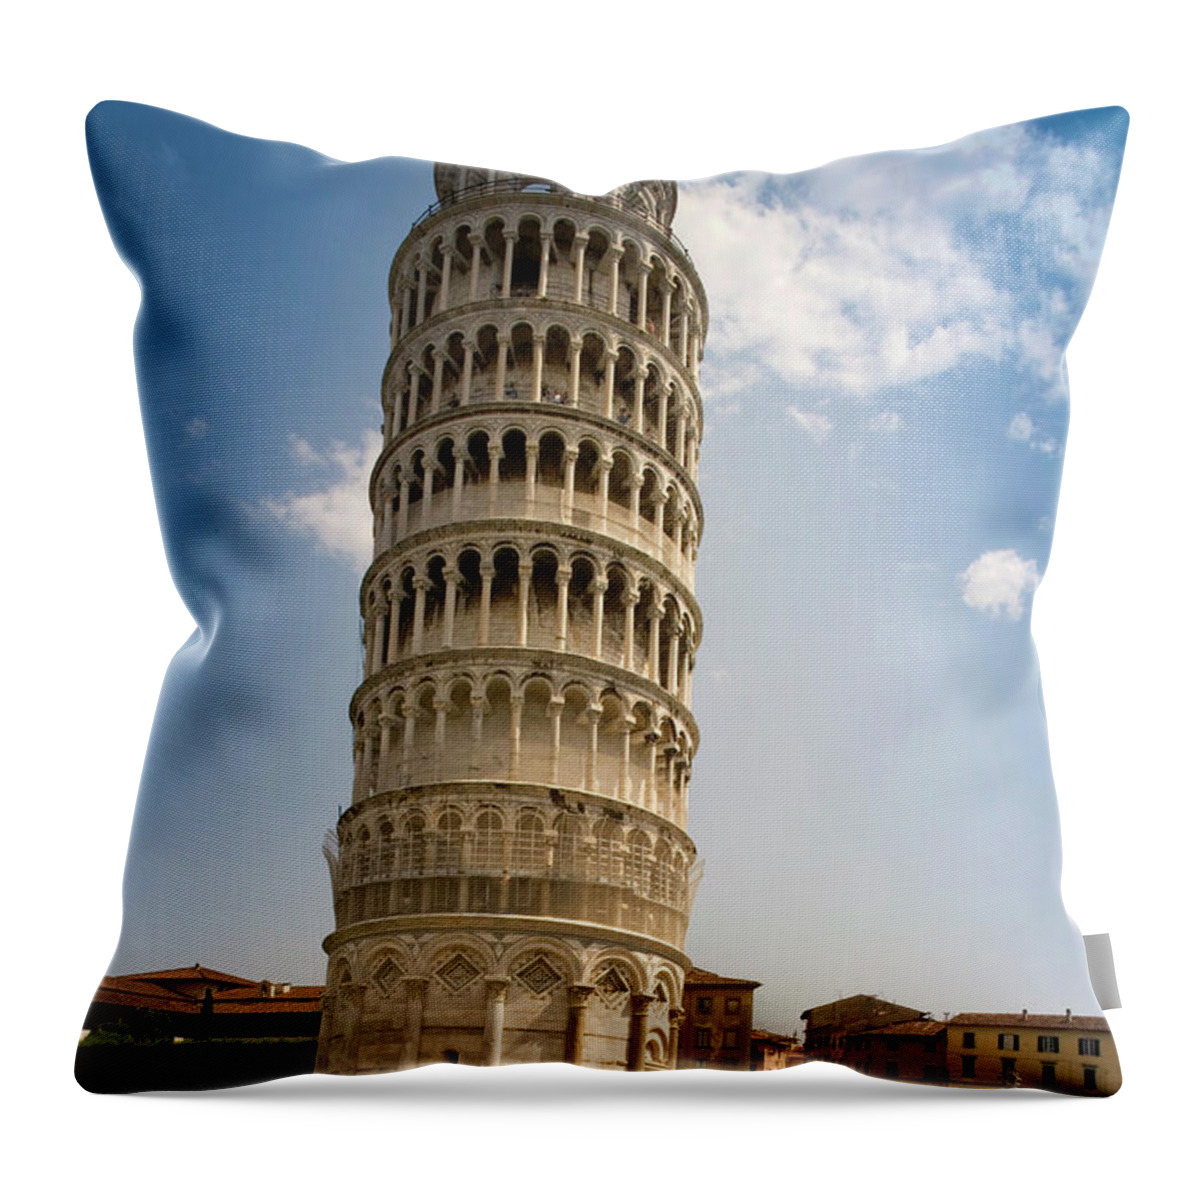 People Throw Pillow featuring the photograph Tourists At Leaning Tower Of Pisa by Cultura Rm Exclusive/walter Zerla